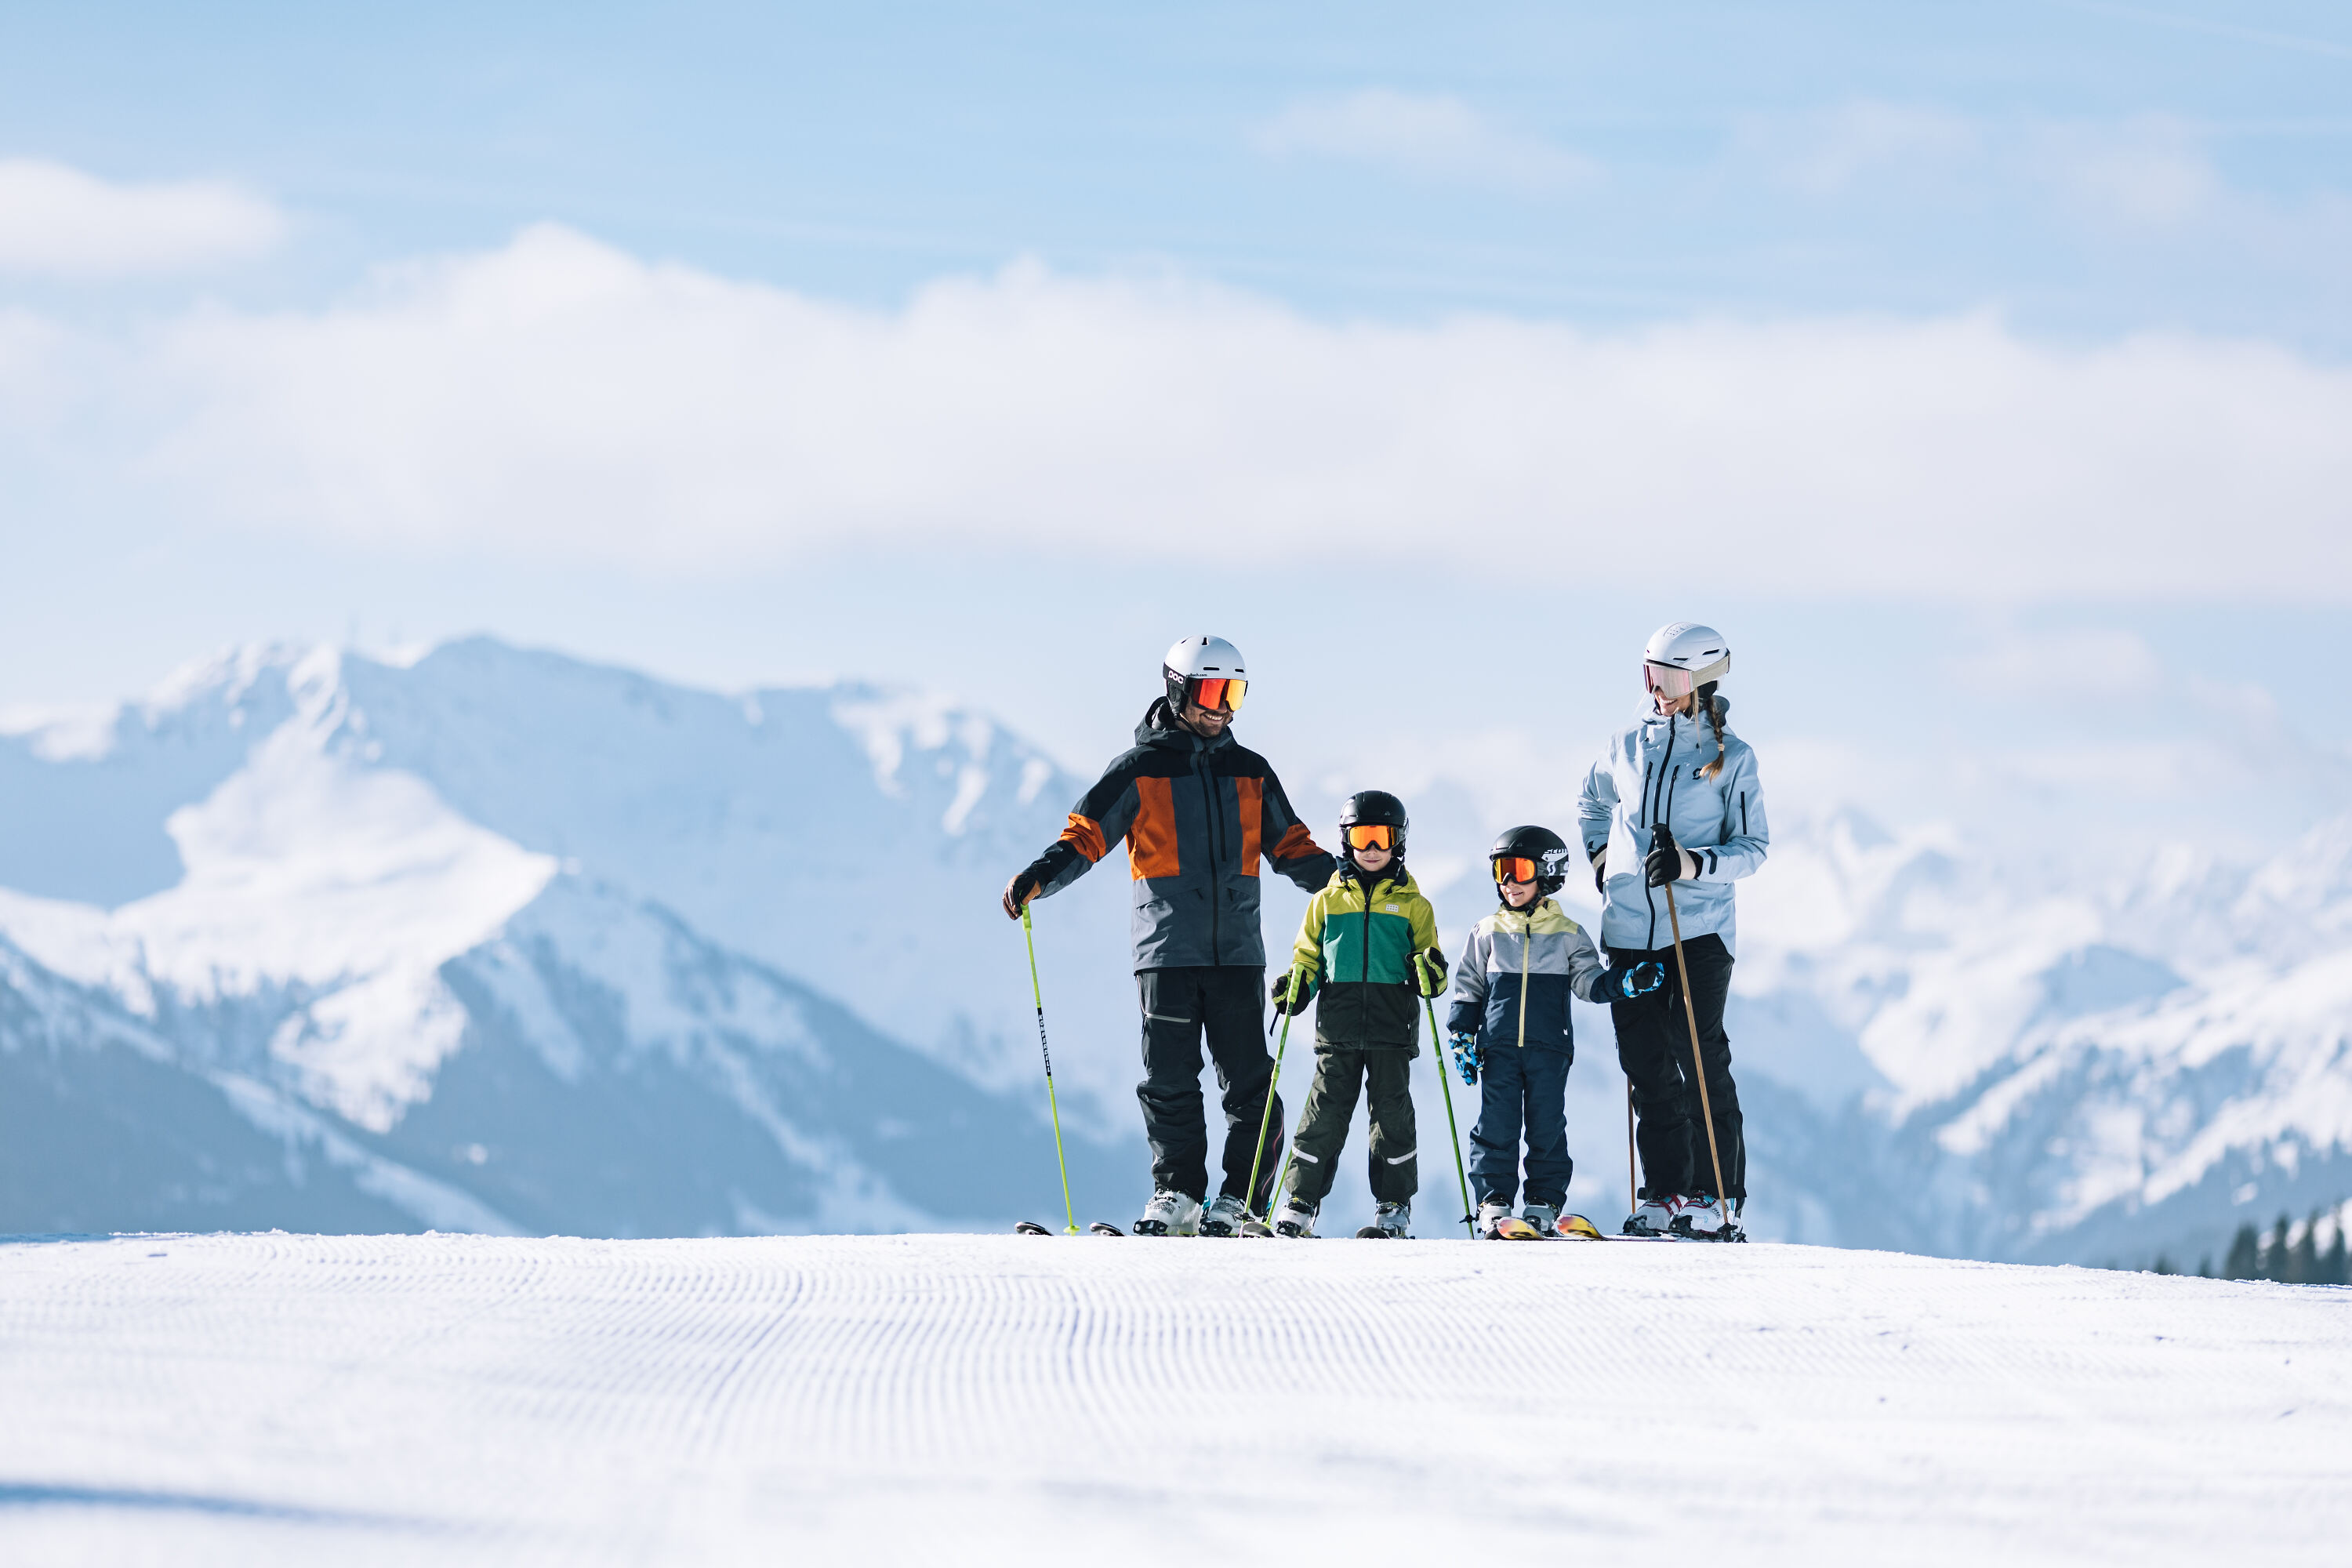 Two adults and two children on a ski slope in the Alps